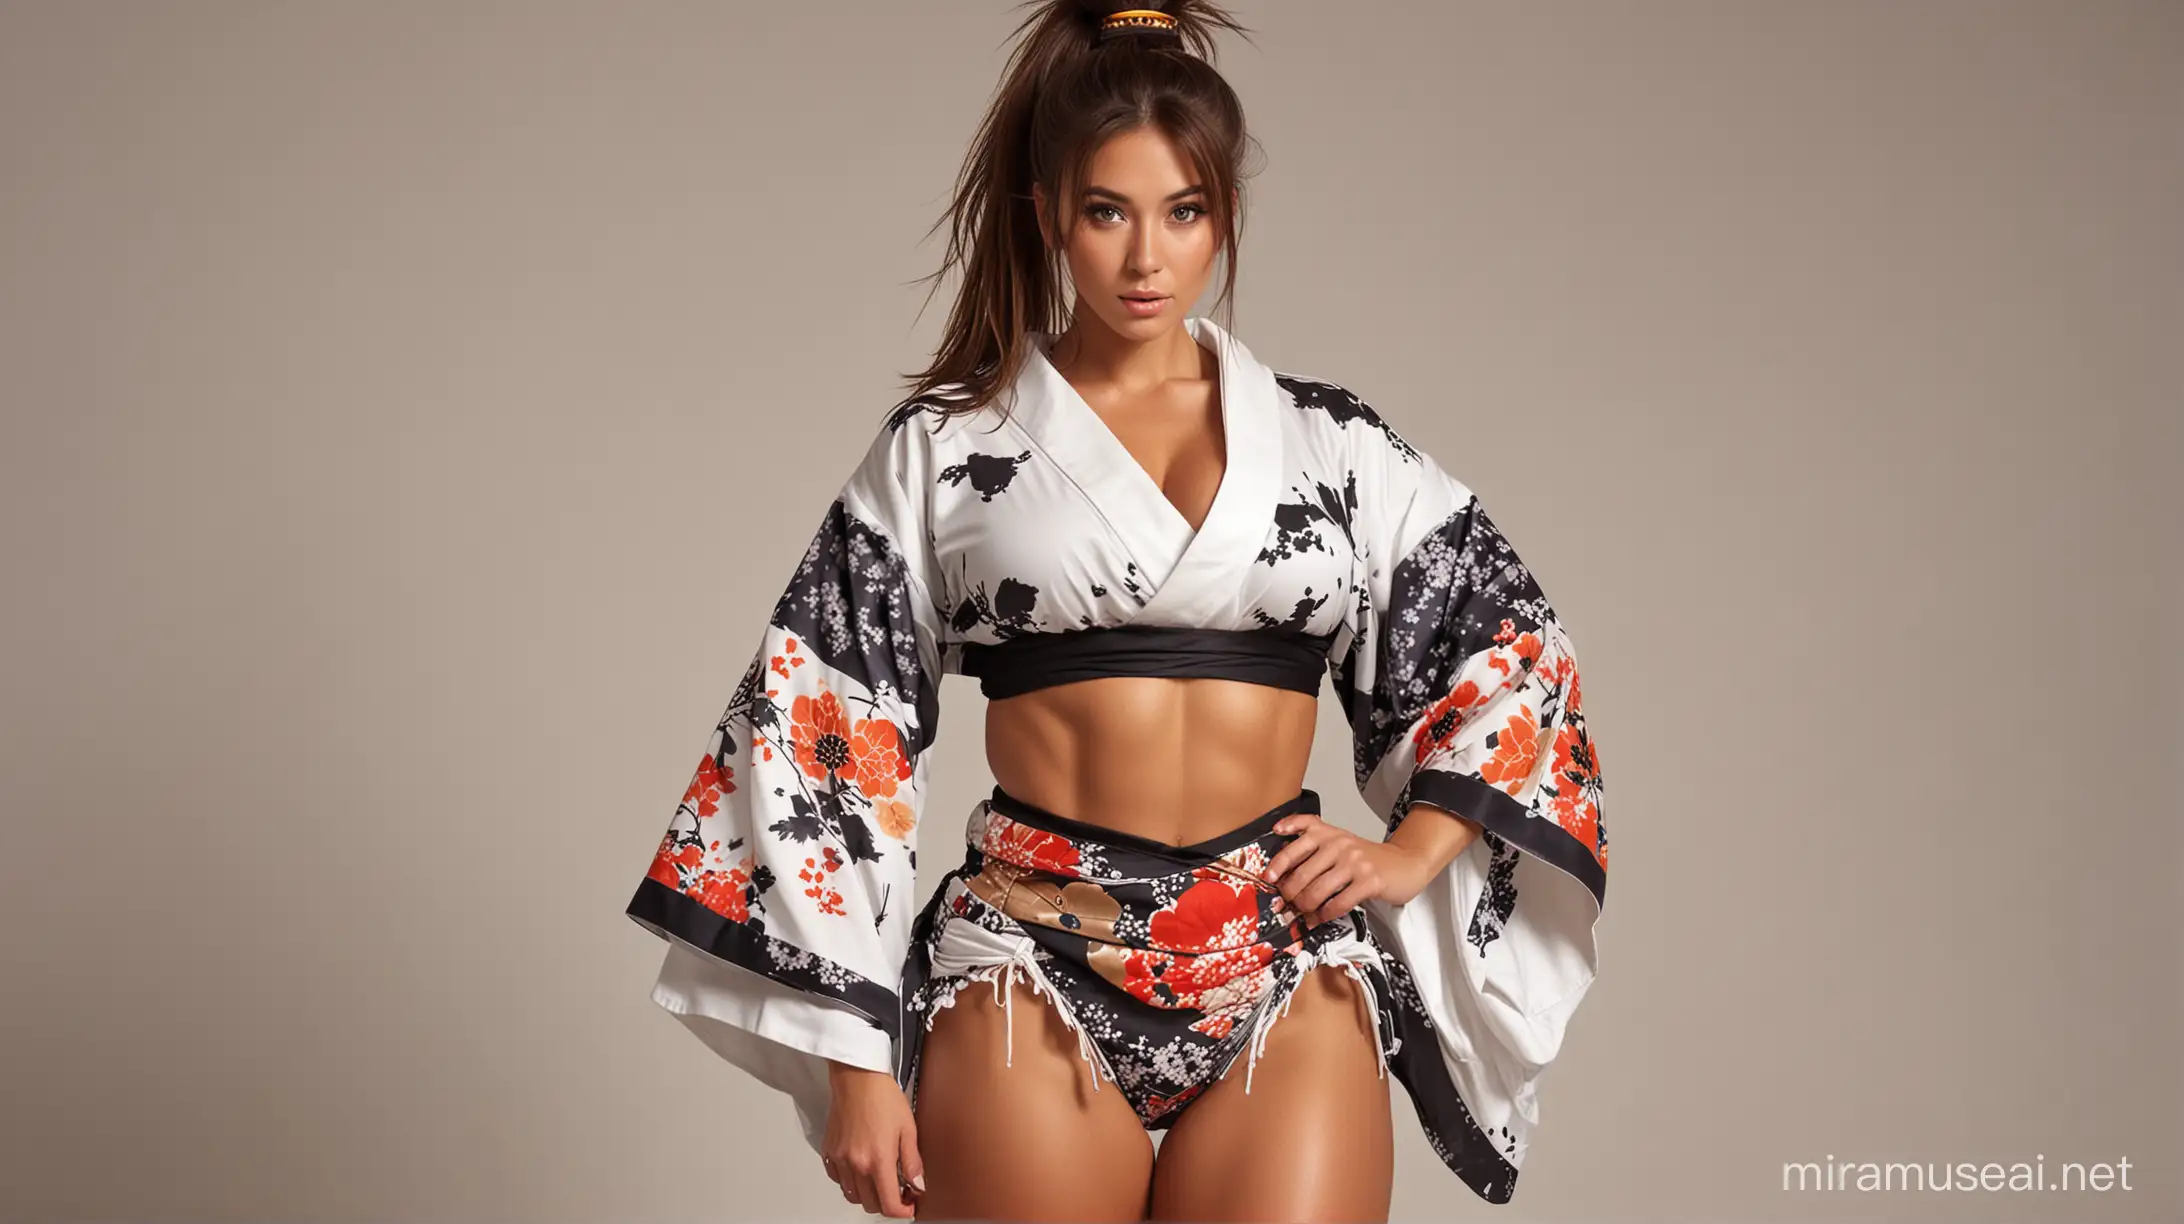 Seductive Gigantic Woman with Muscular Arms and Kimono Sleeves